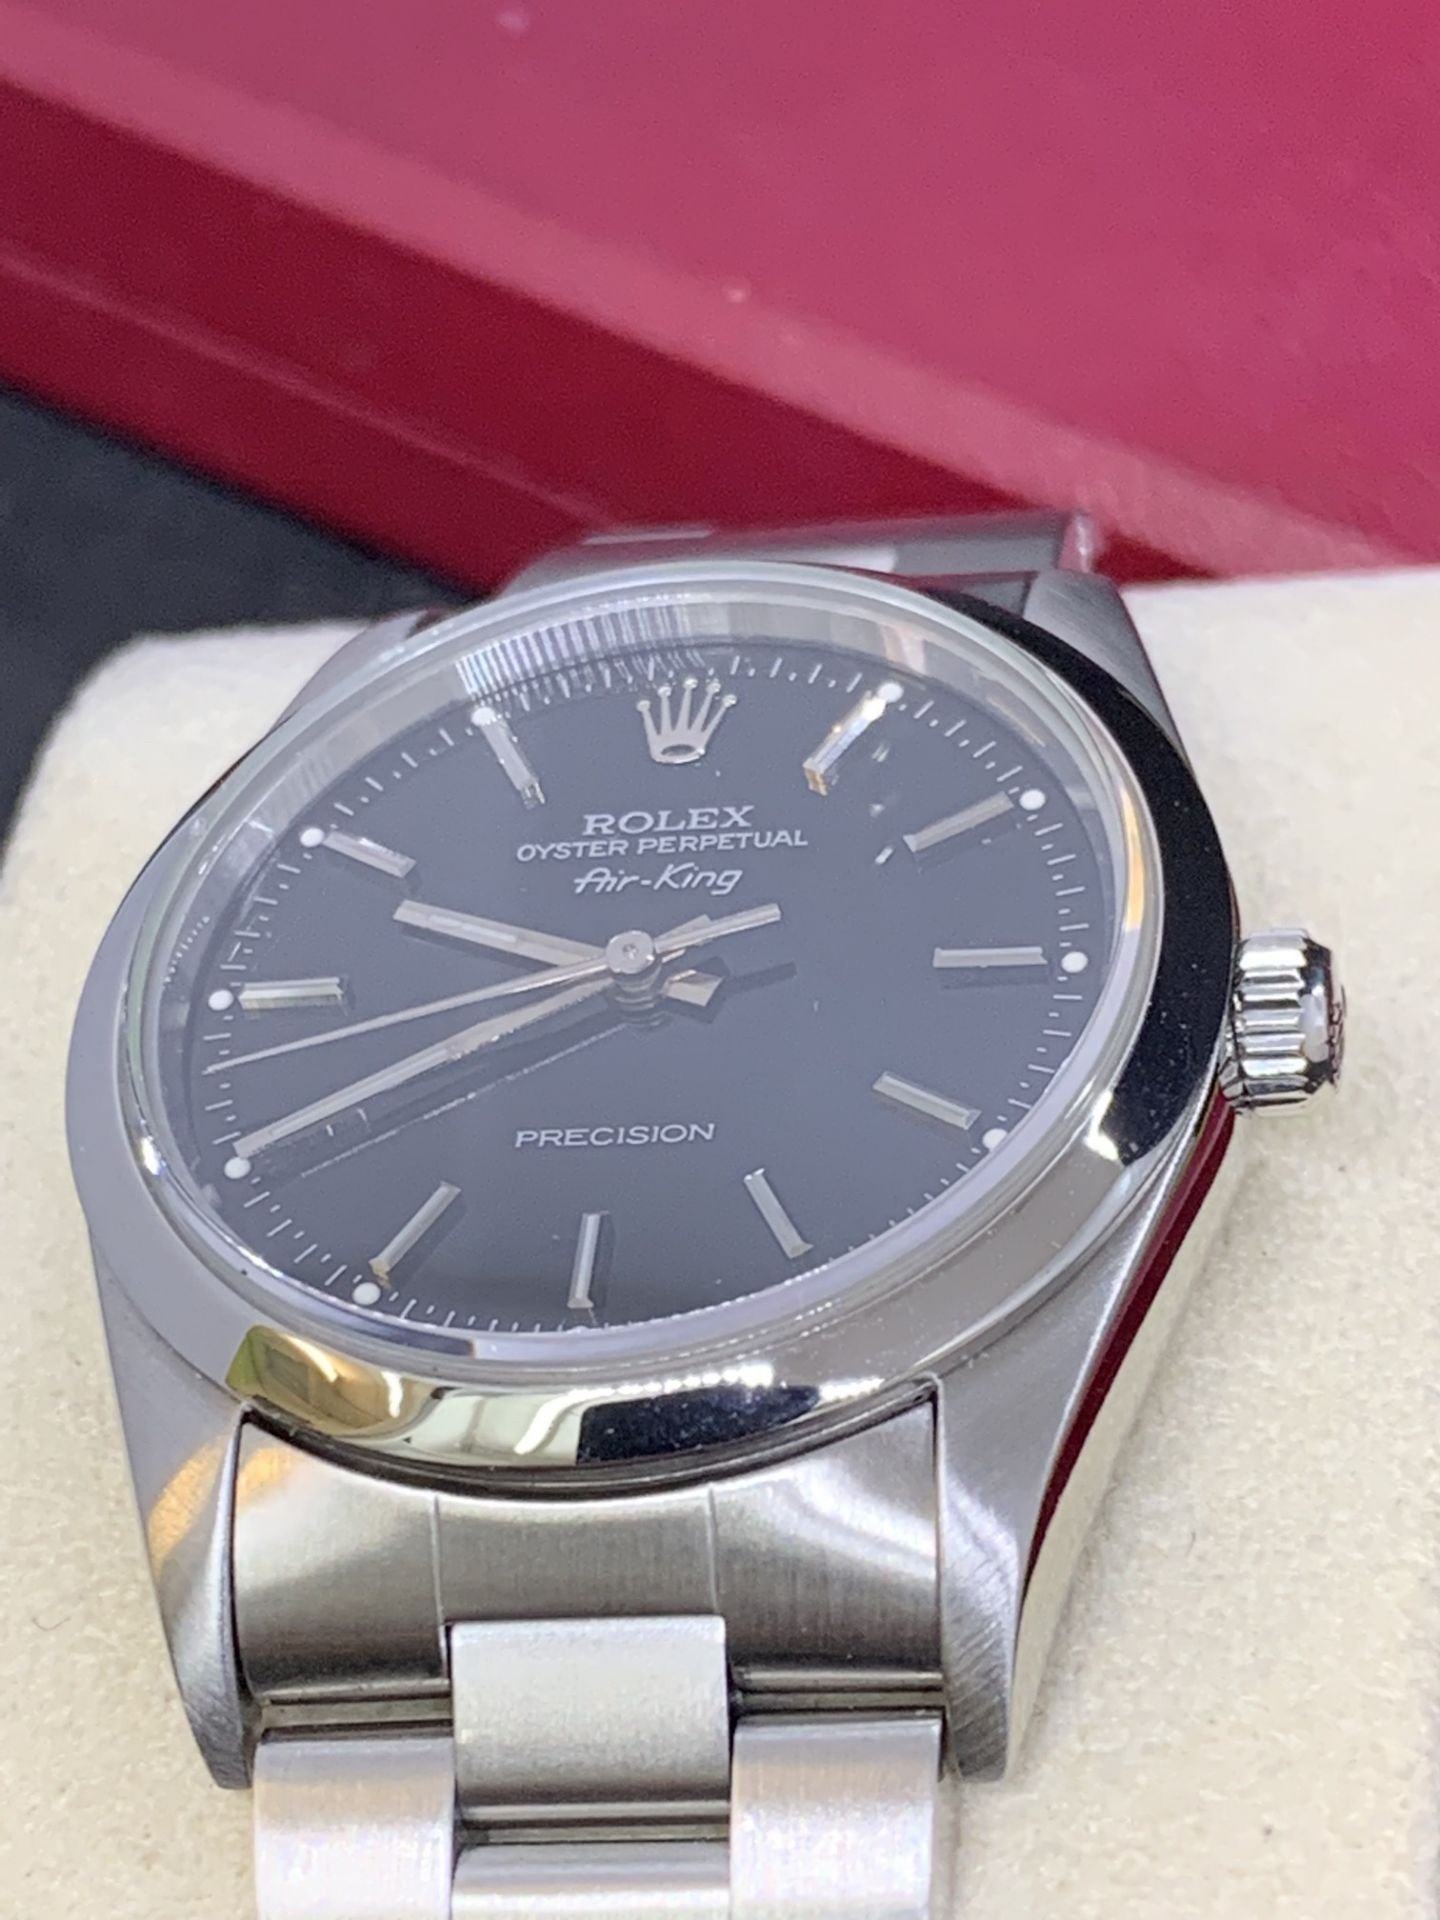 ROLEX PERPETUAL AIR KING STAINLESS STEEL WATCH - APPROX 2000 - Image 3 of 12